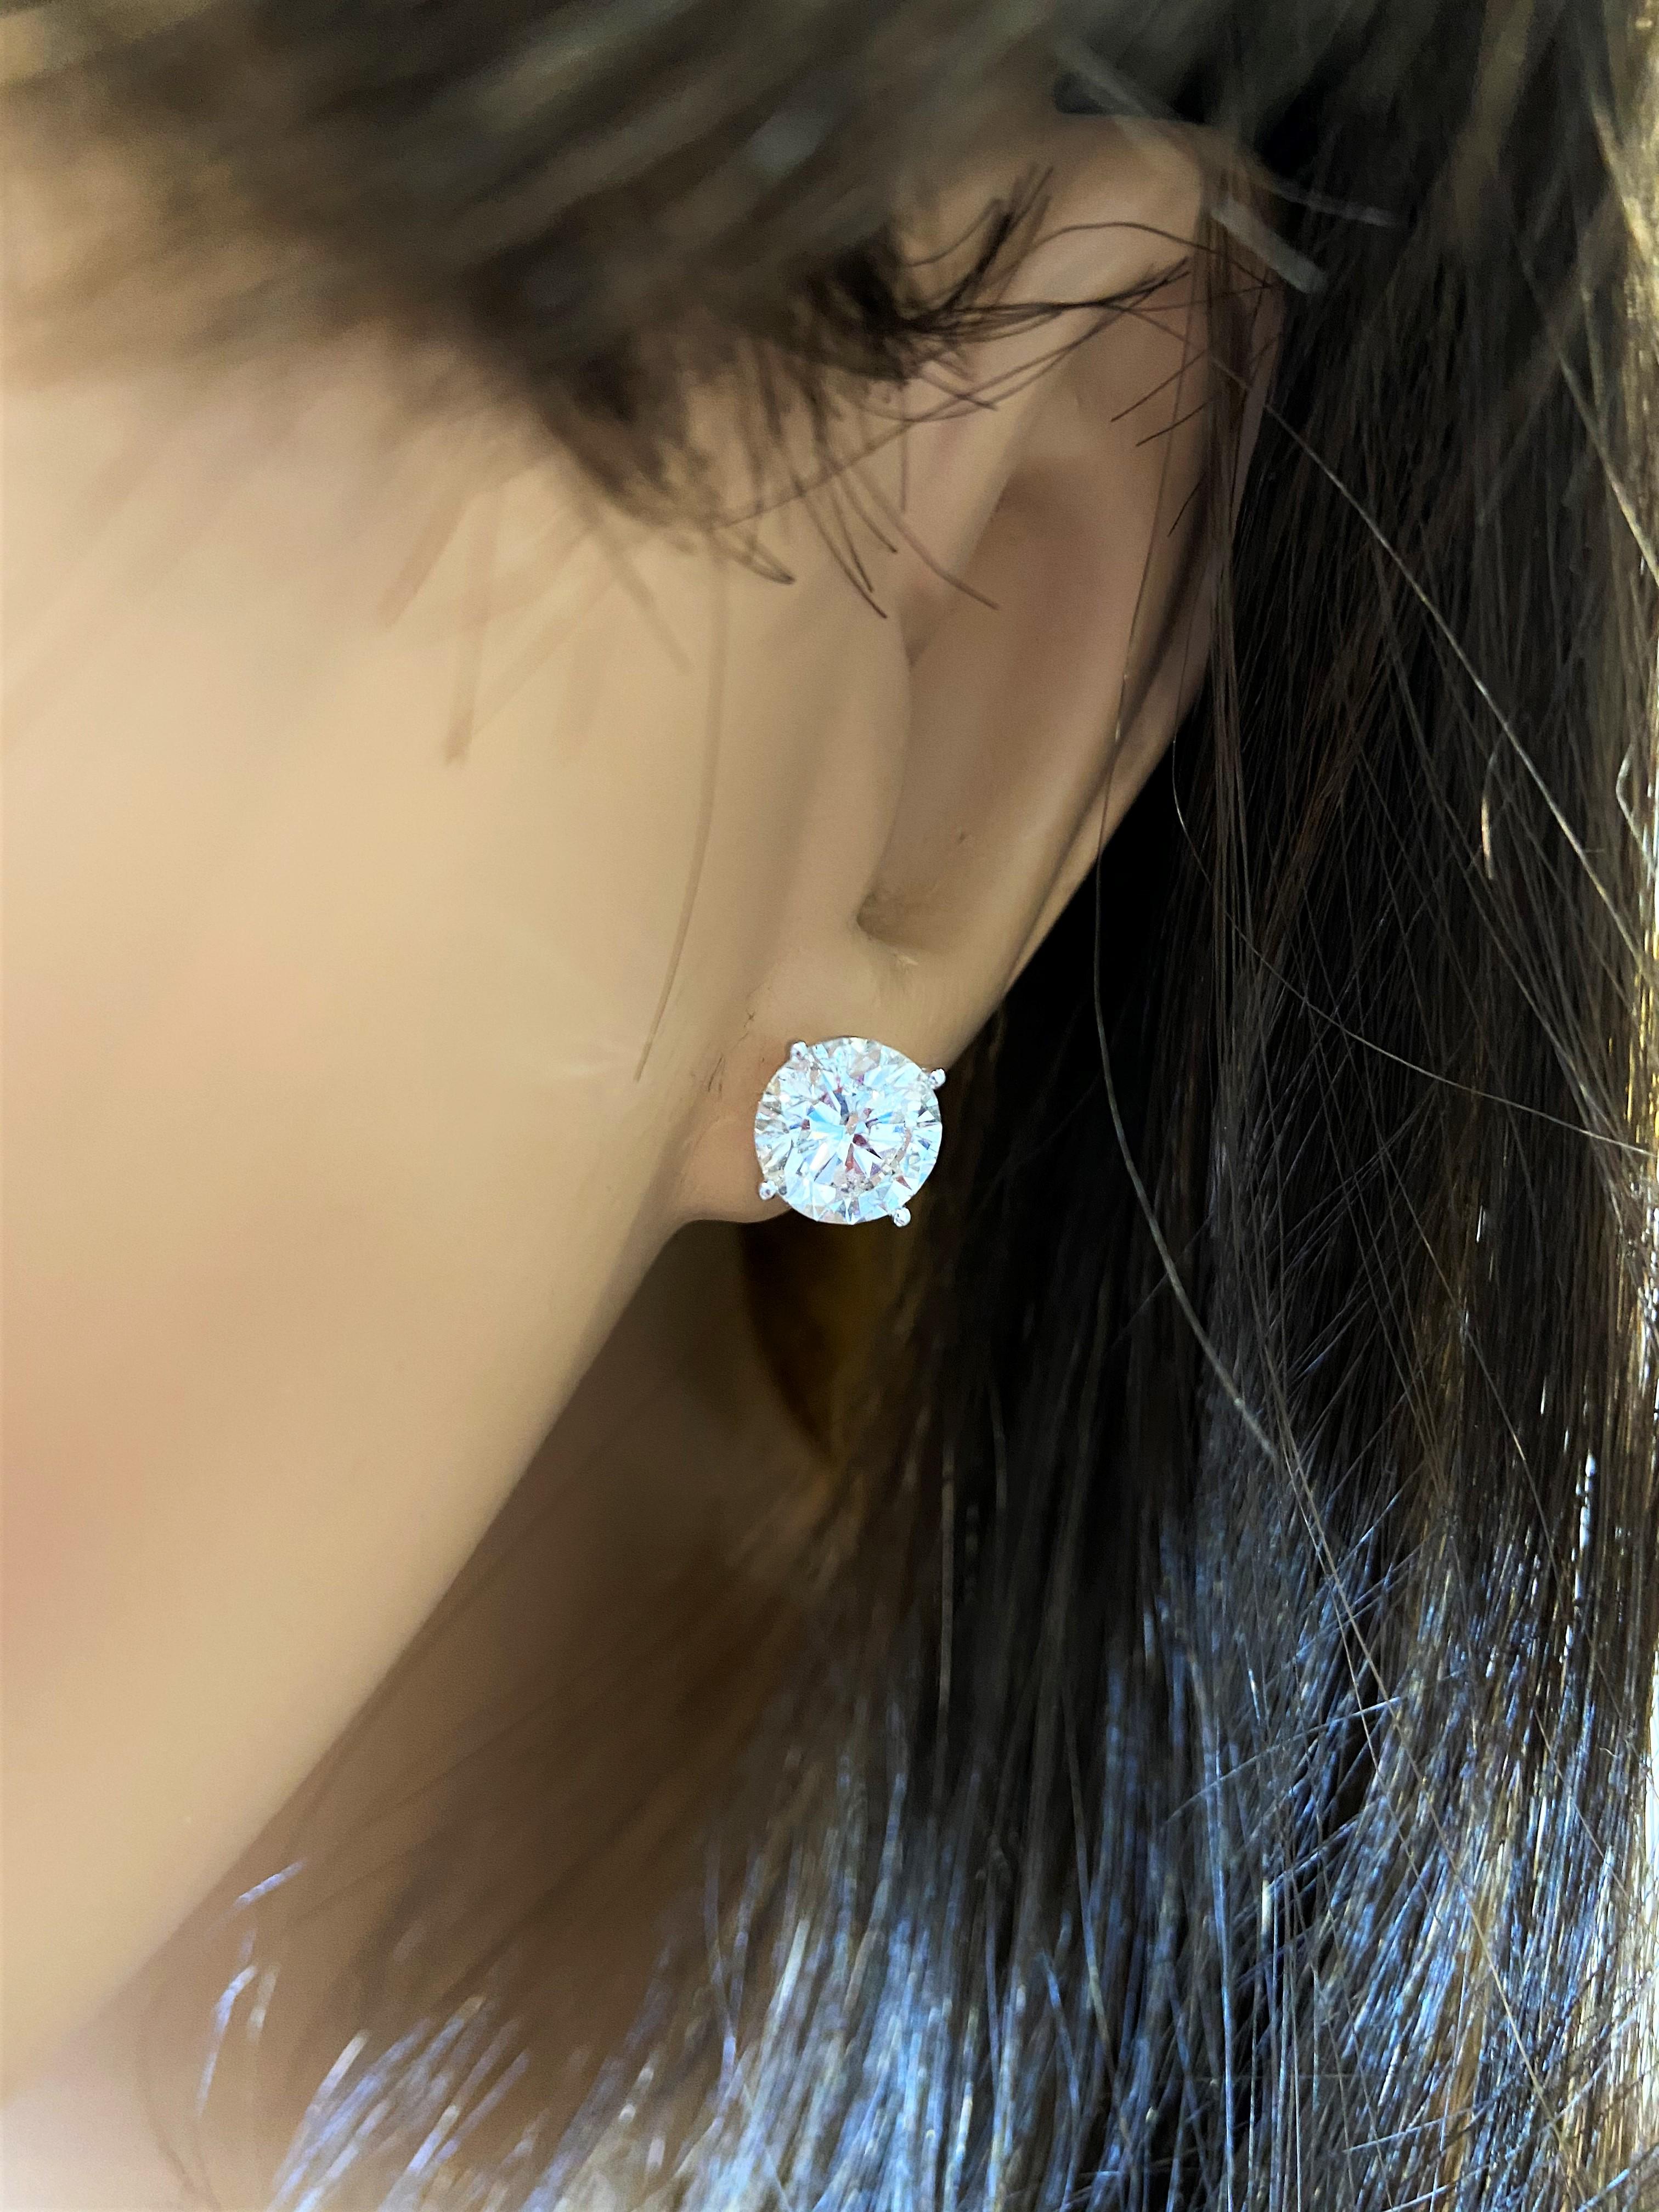 Stunning 14 Karat white gold EGL USA certified handmade earrings featuring 2 round brilliant cut diamonds weighing 4.00cts total G-H color SI2-SI3 clarity. The stunning earrings measure 8.00mm in diameter, these gorgeous earrings are classic and